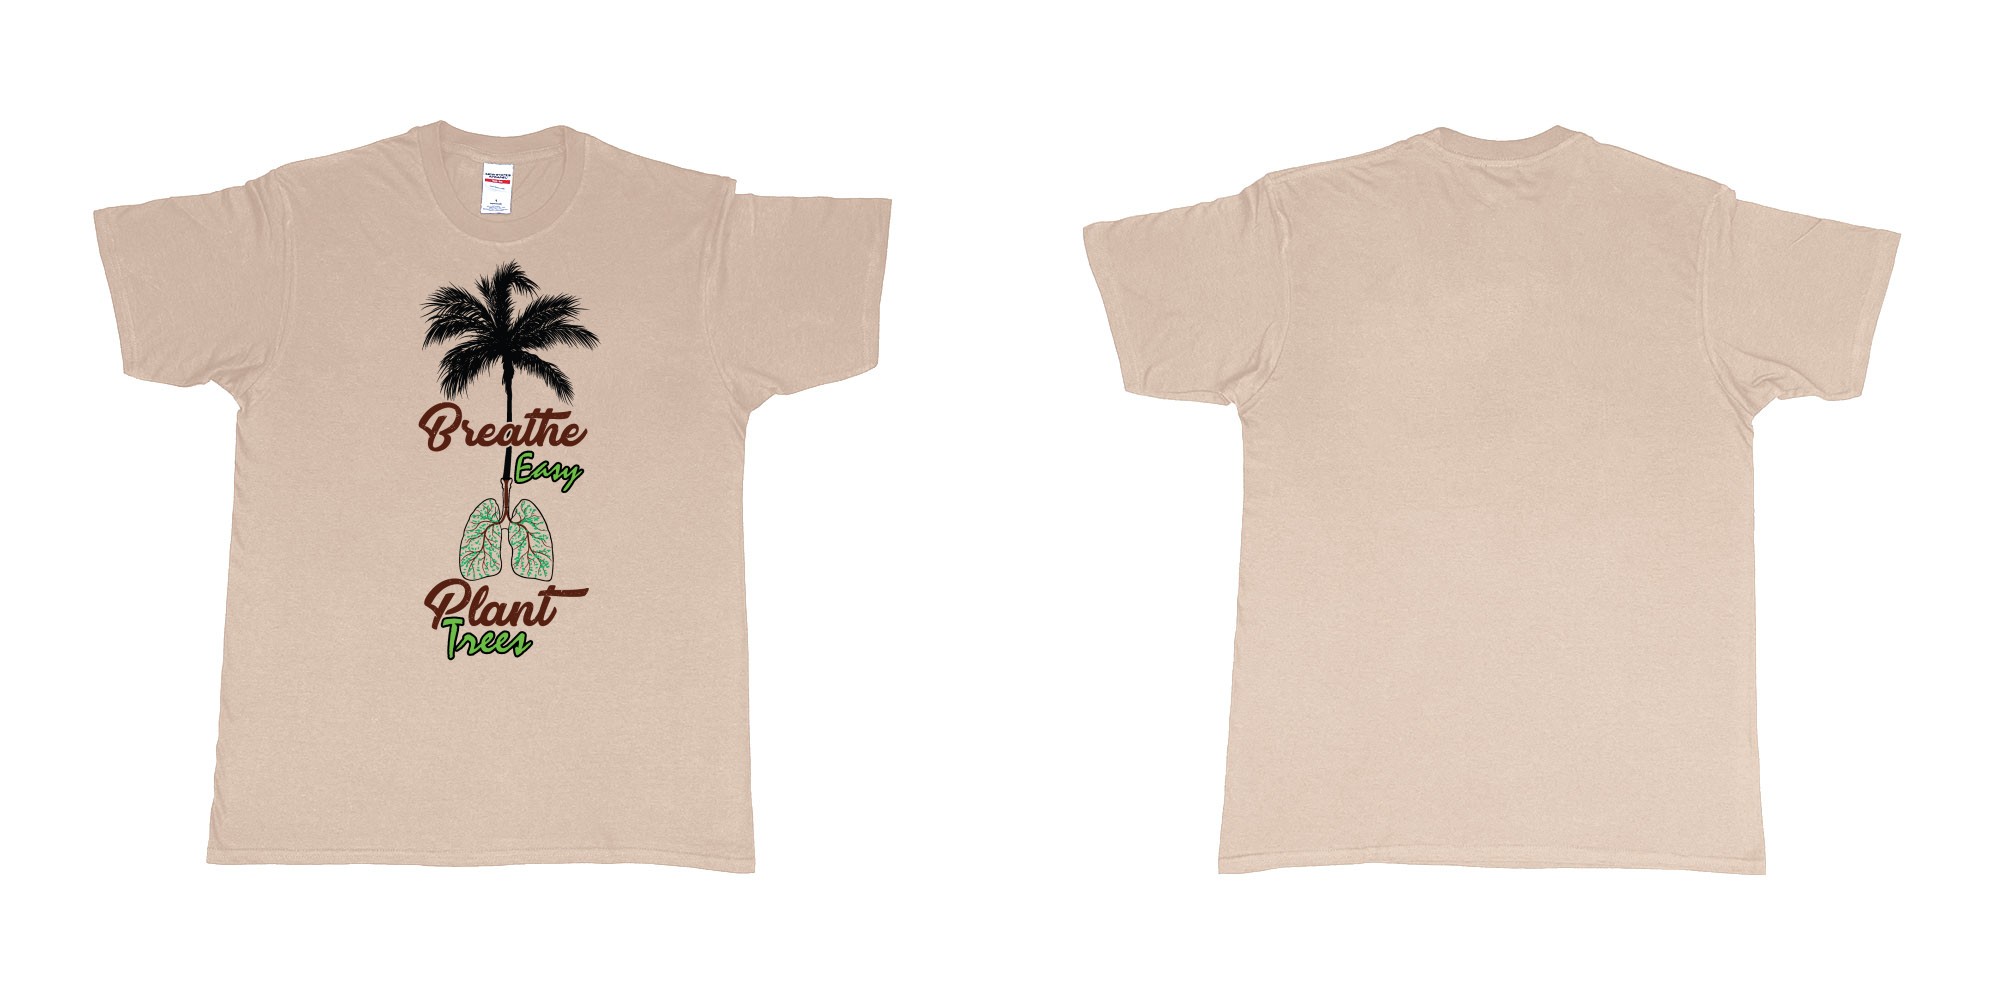 Custom tshirt design breathe easy and plant a tree for better air for everyone in fabric color sand choice your own text made in Bali by The Pirate Way